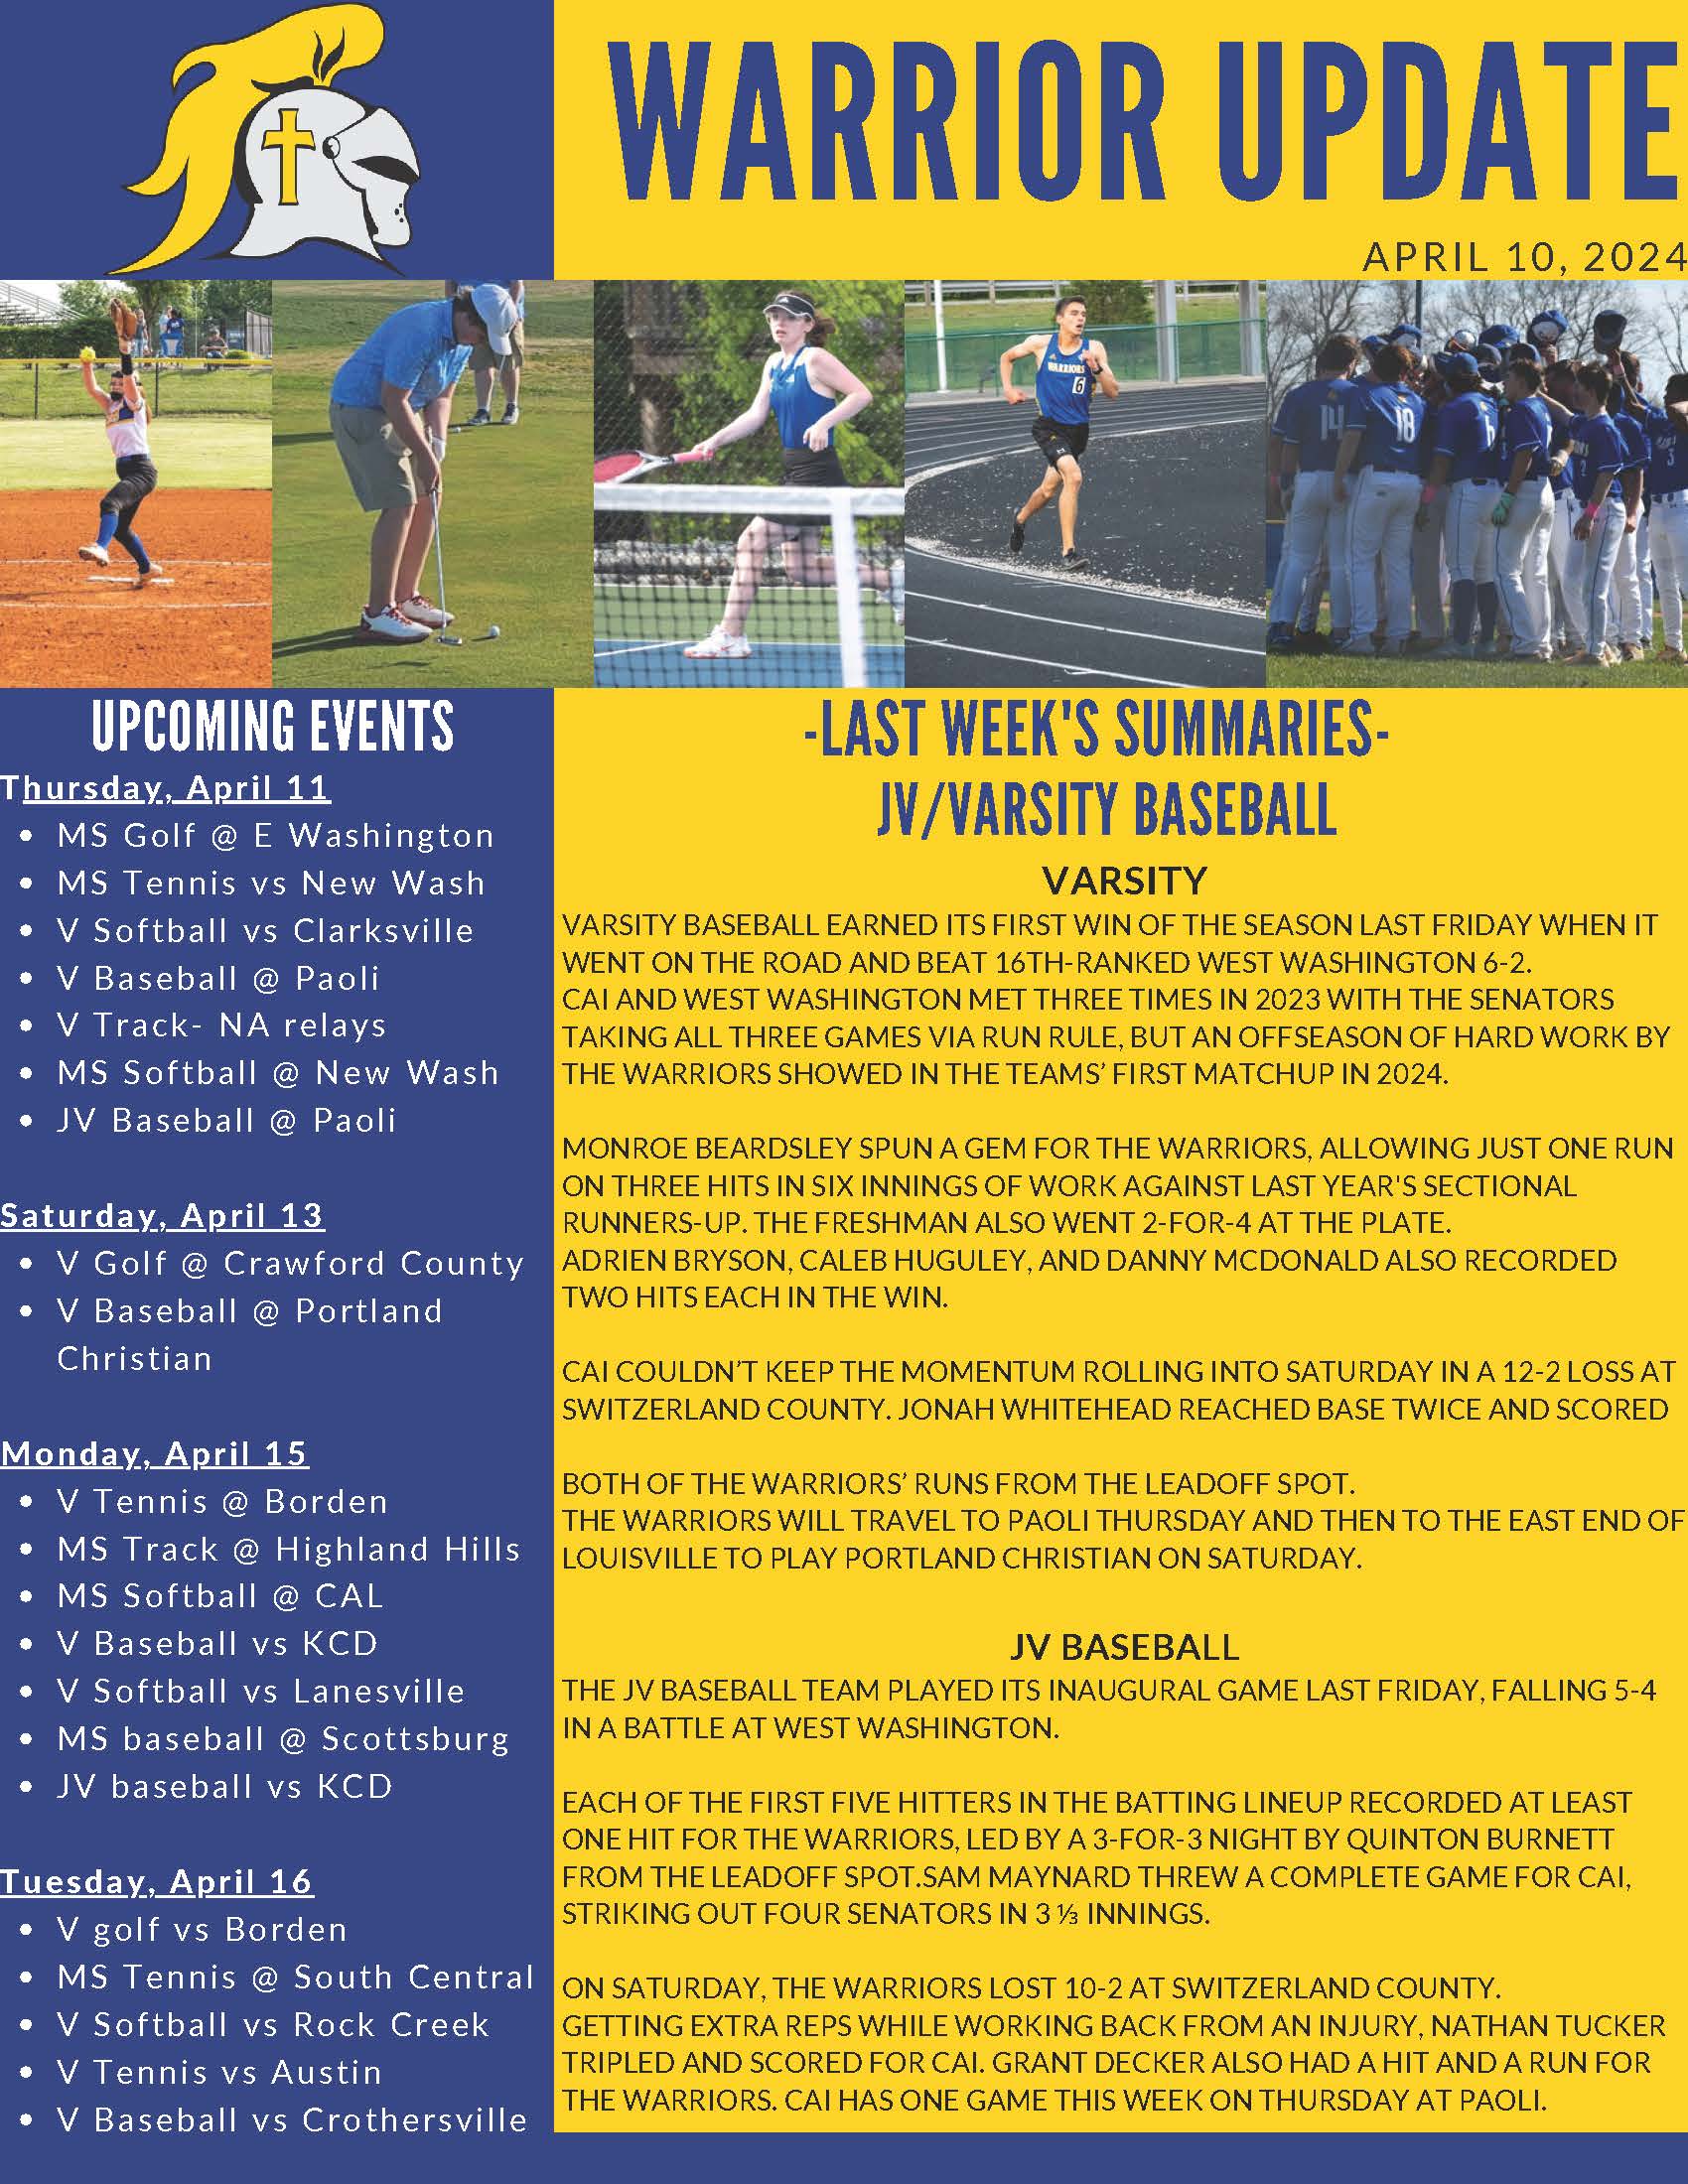 Christian Academy School System | Christian Academy of Indiana | Athletics | Warrior Update | April 10